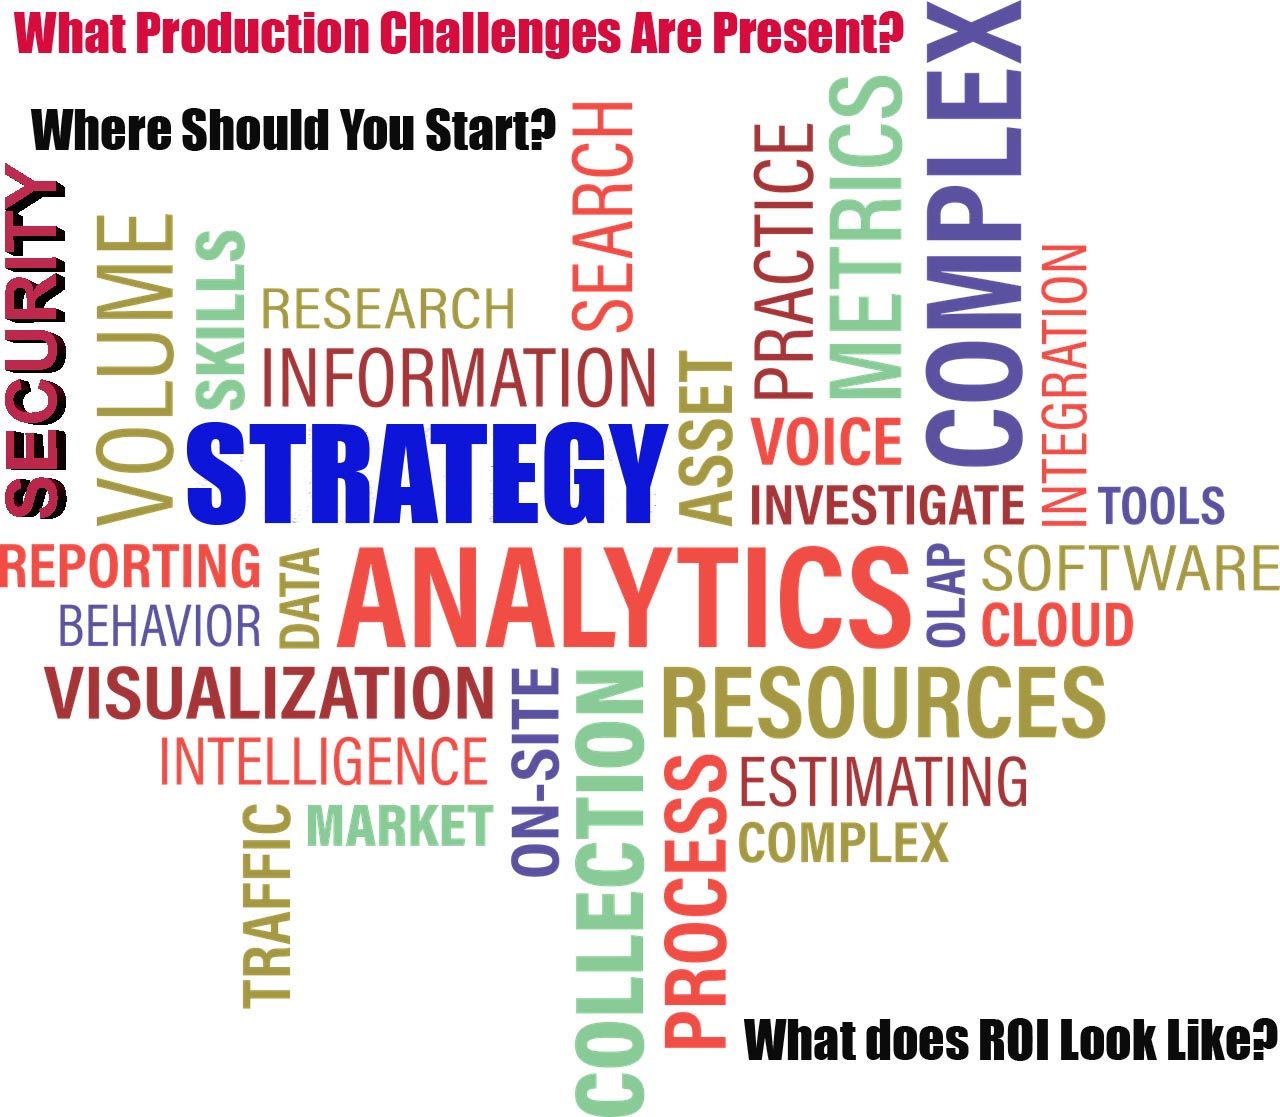 4 Questions to Answer Before Implementing an Analytics Strategy.